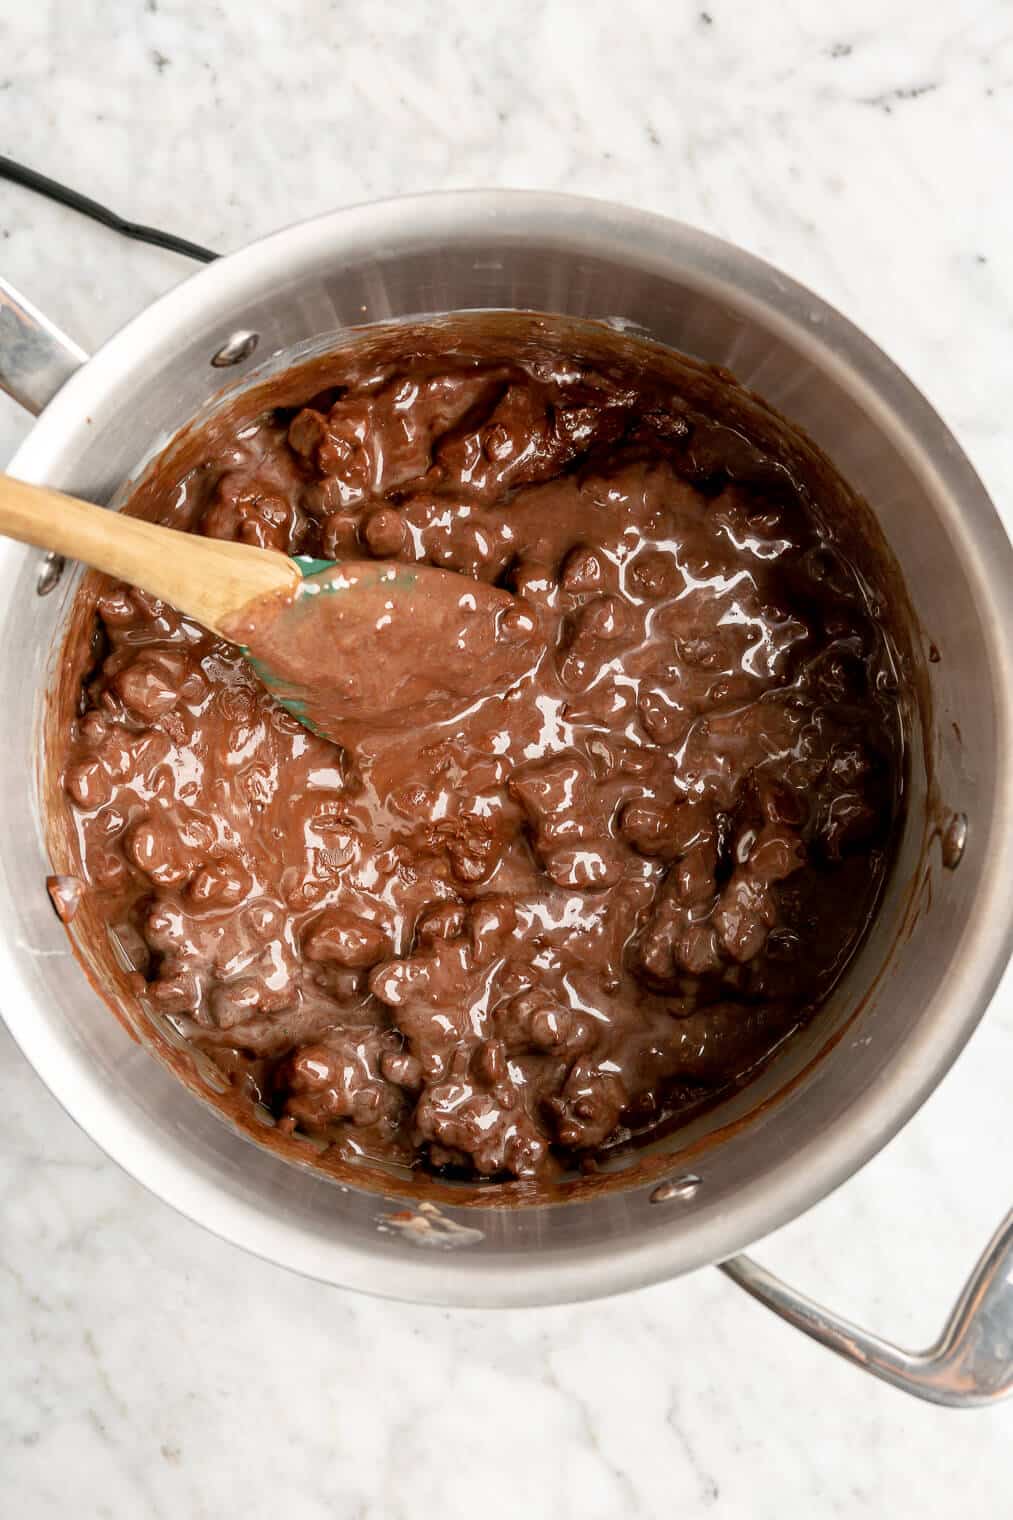 Spoon stirring together melting chocolate chips and sweetened condensed milk in a saucepan.